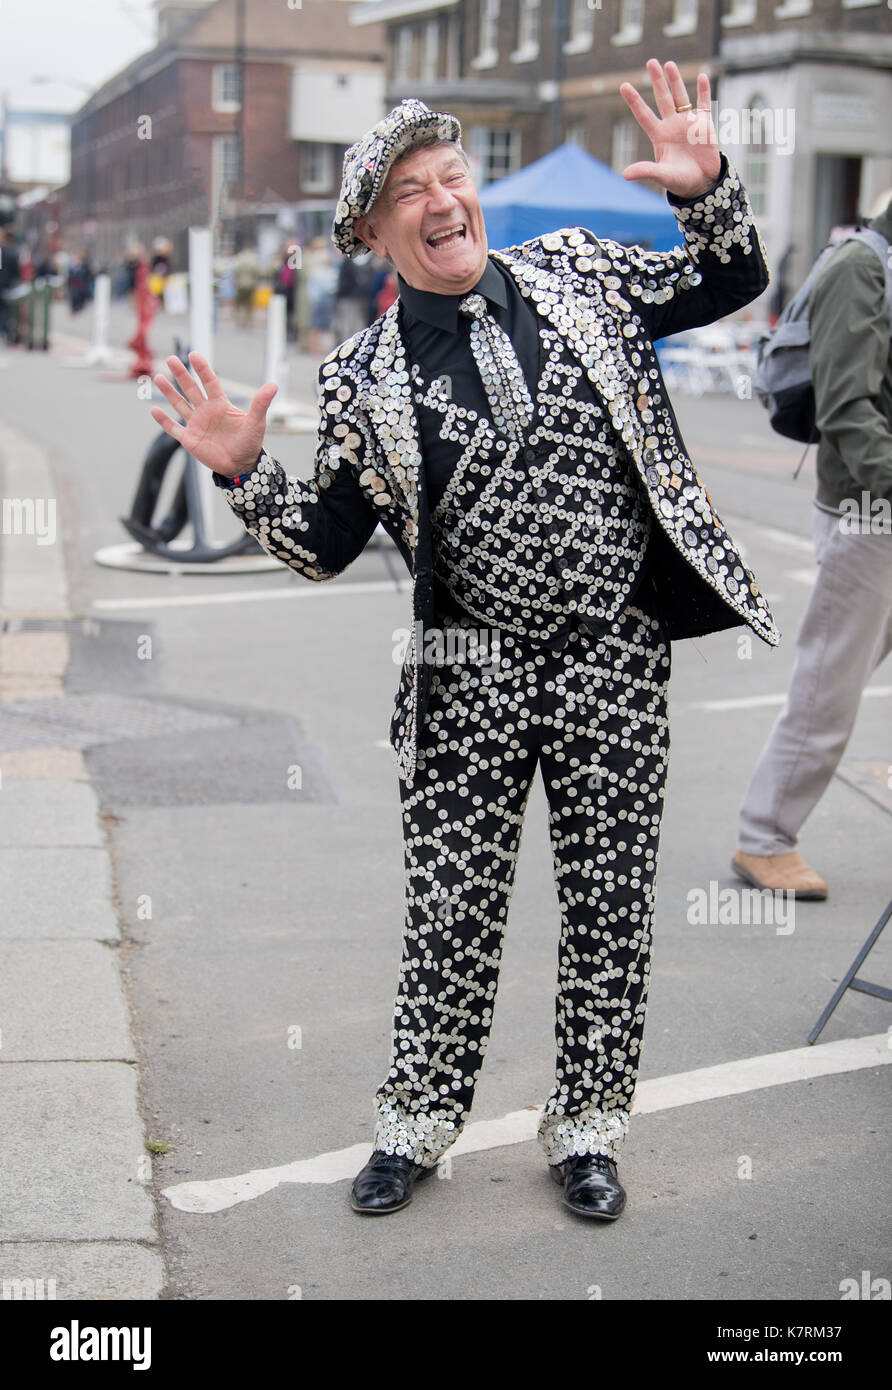 Chatham, Kent, UK. 17 September 2017. Pearly King bringing the past to life with 1940s period dress and world war 2 era cars and planes at the Salute to the 40’s Vintage Weekend at Chatham Historic Dockyard. © Matthew Richardson/Alamy Live News Stock Photo